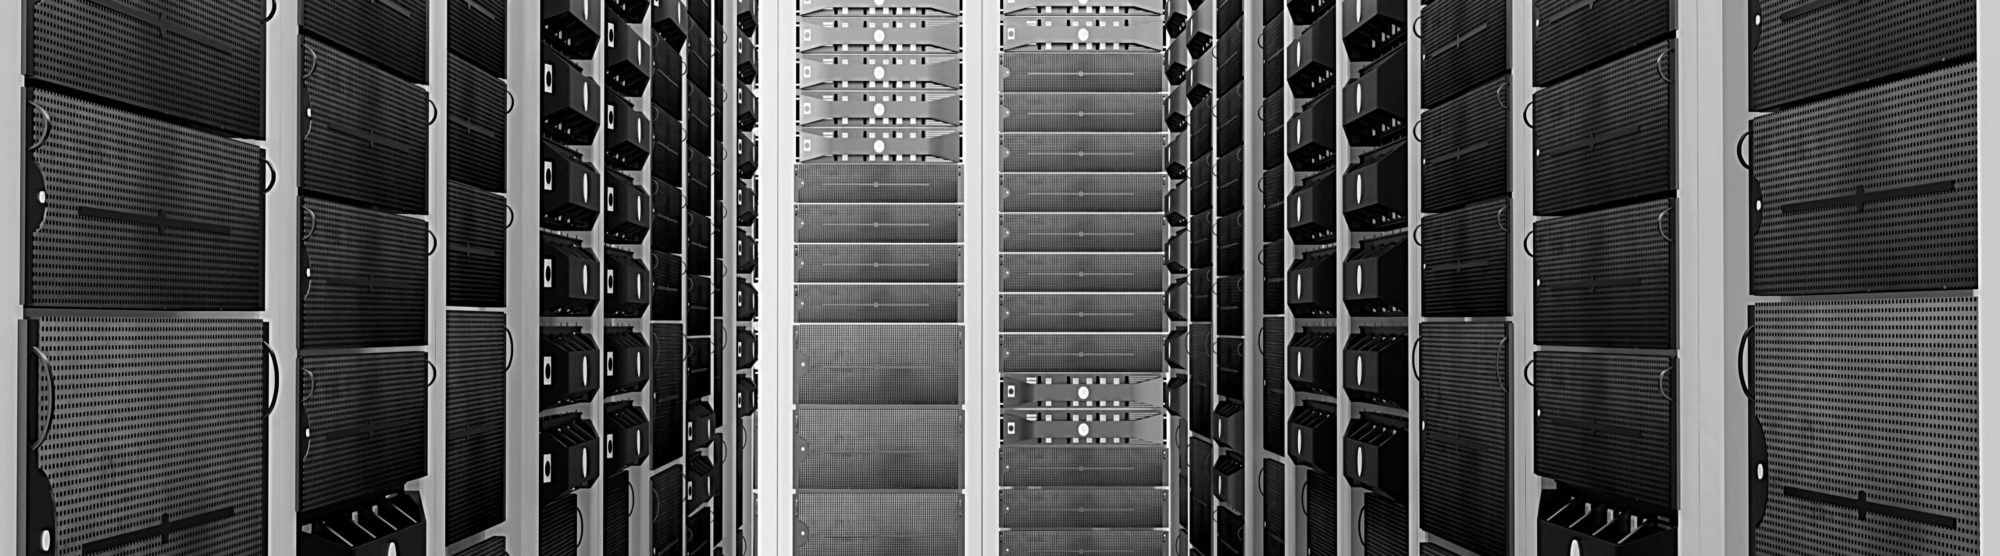 artistic image of data center cabinents, in black and white